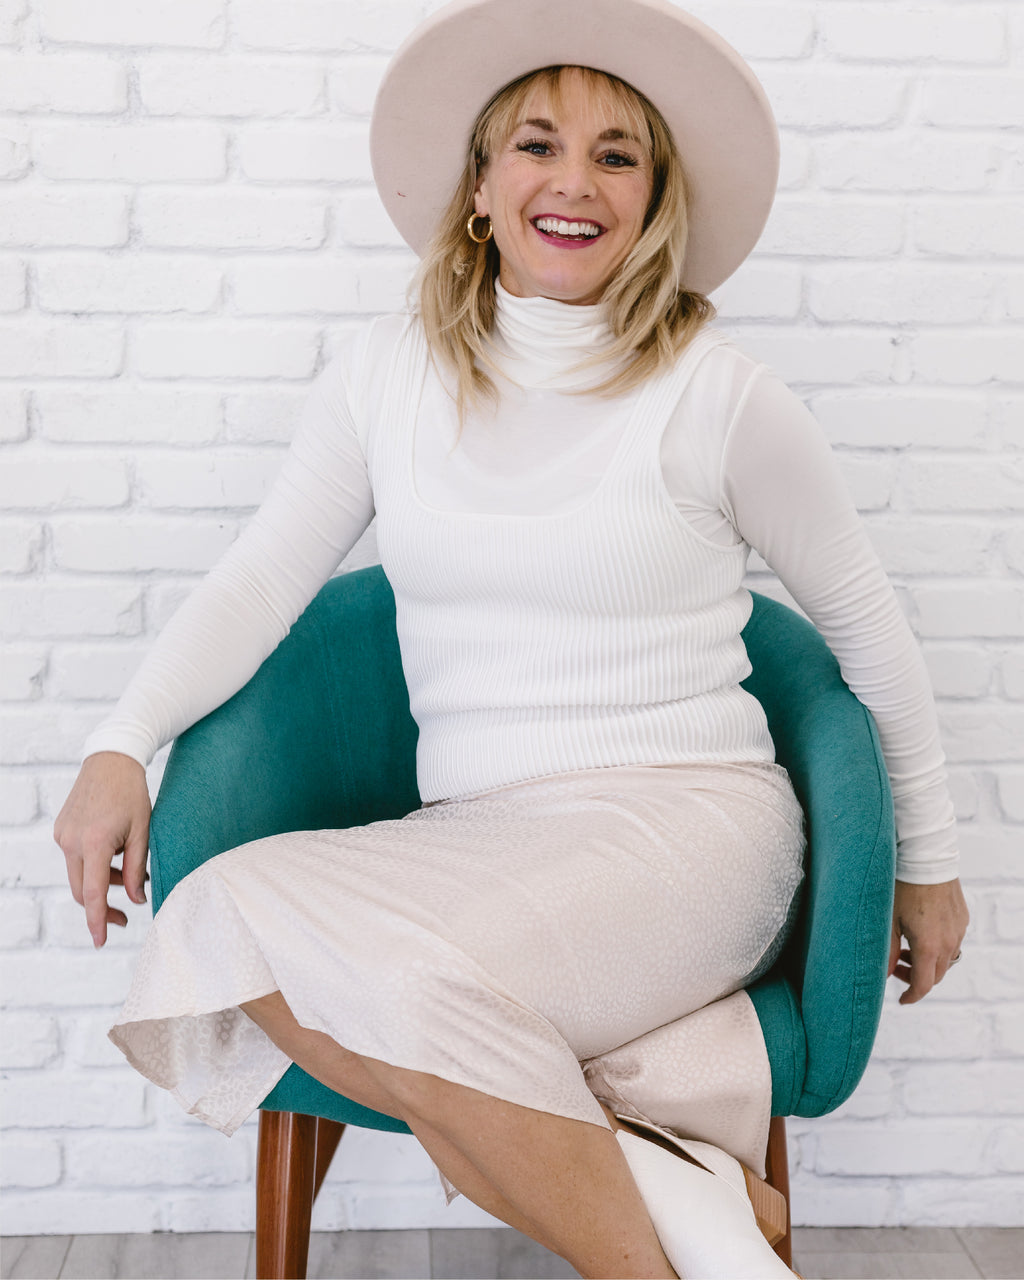  Woman in white sweater and hat sitting on green chair, wearing Midi Animal Print Skirt.